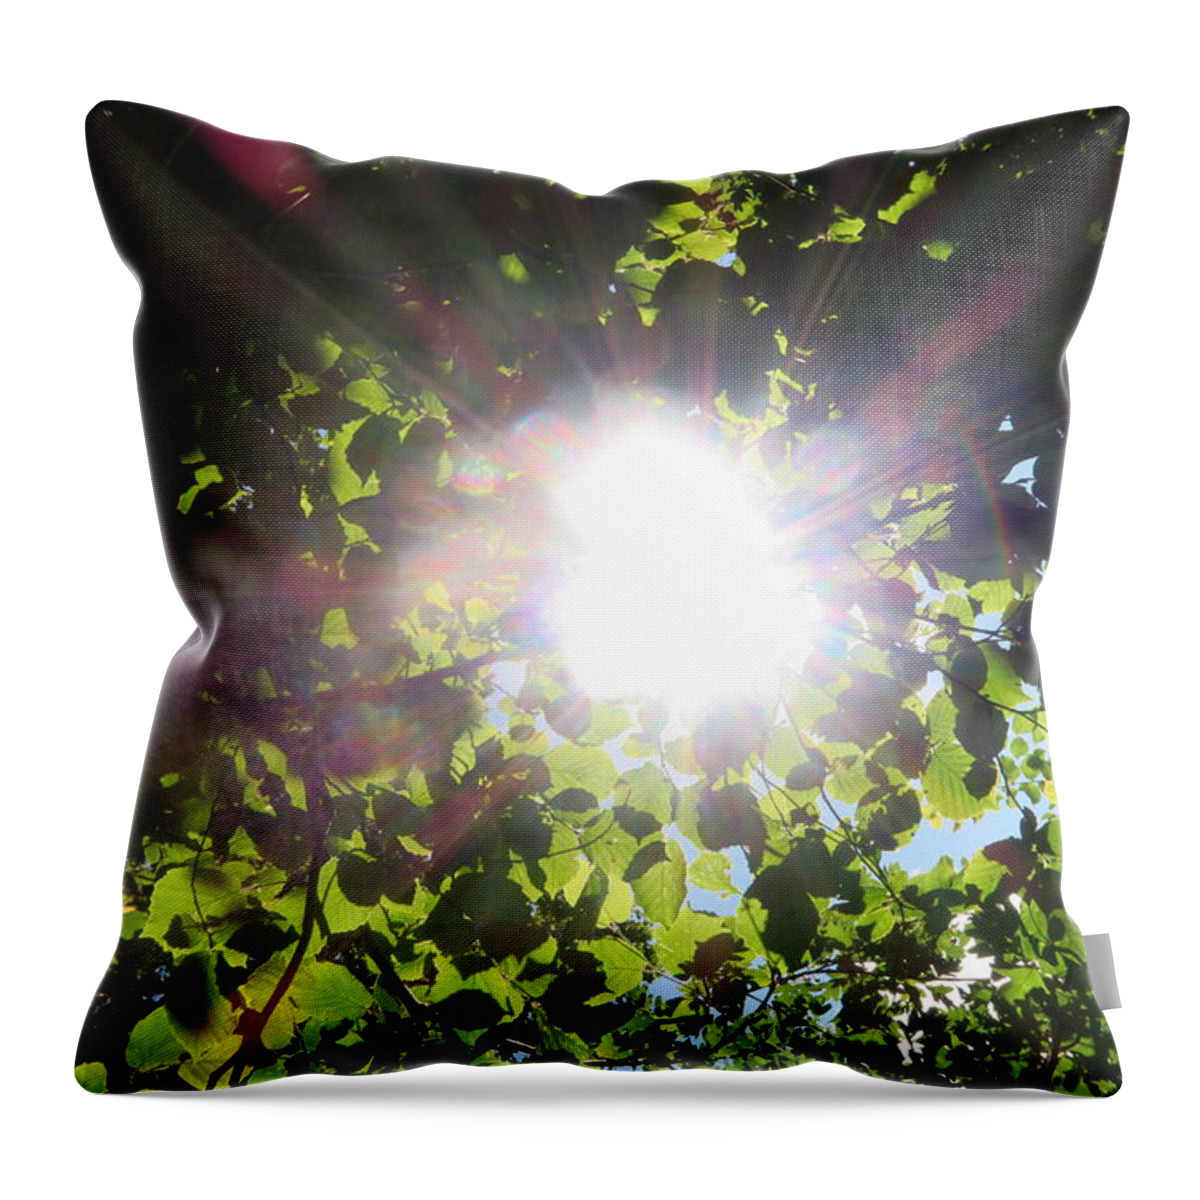 Sunblast Throw Pillow featuring the photograph Sunblast by Zoe Oakley